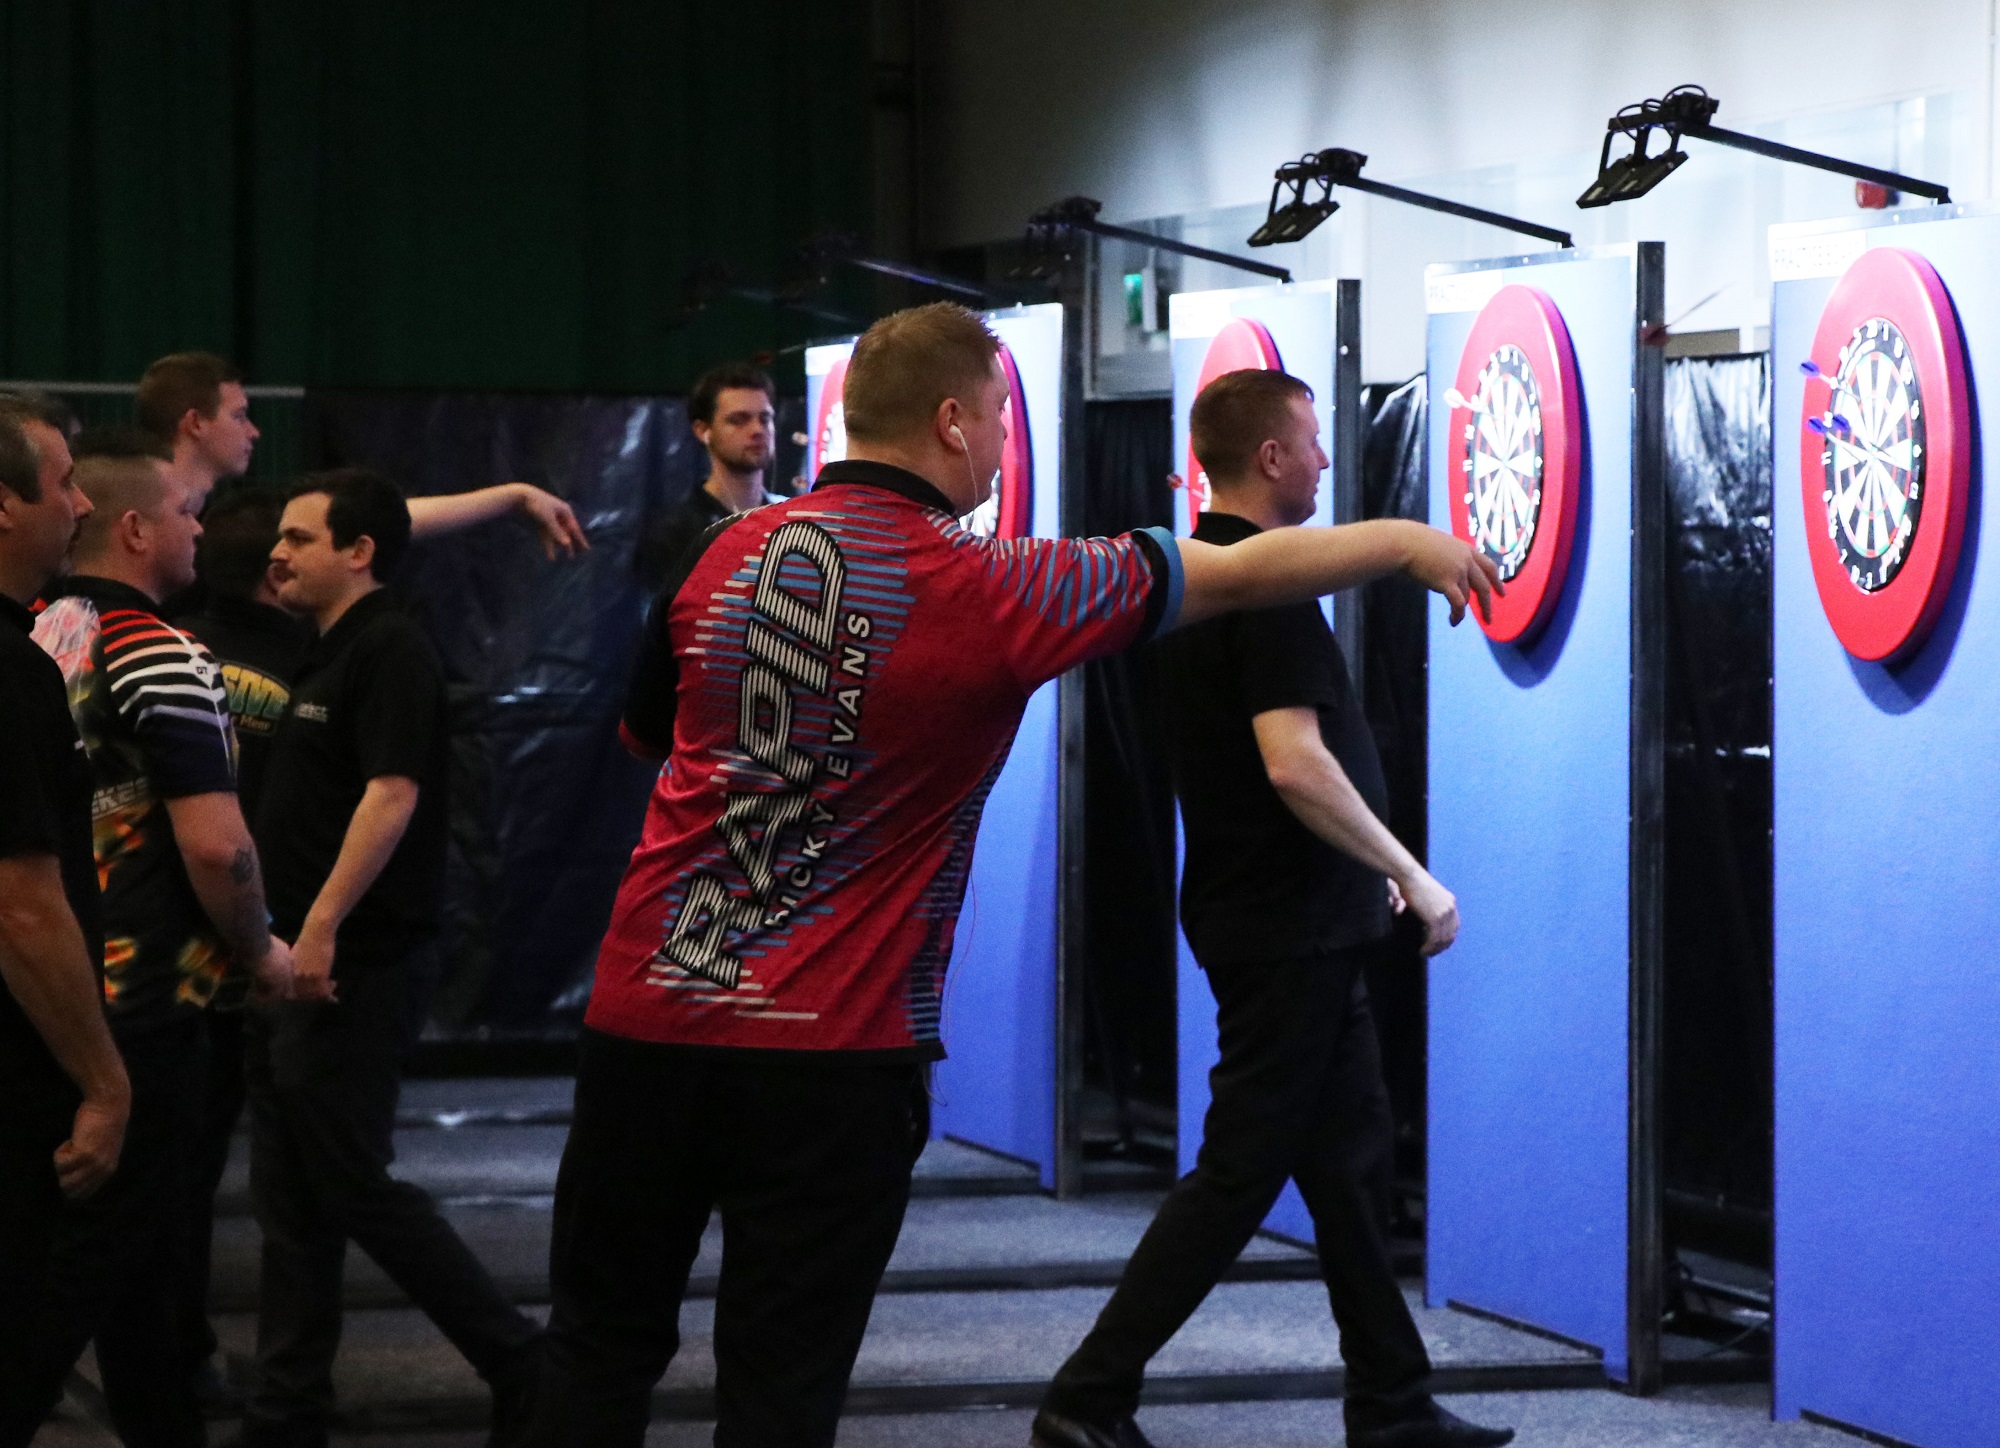 Double postponement for PDC tour PDC